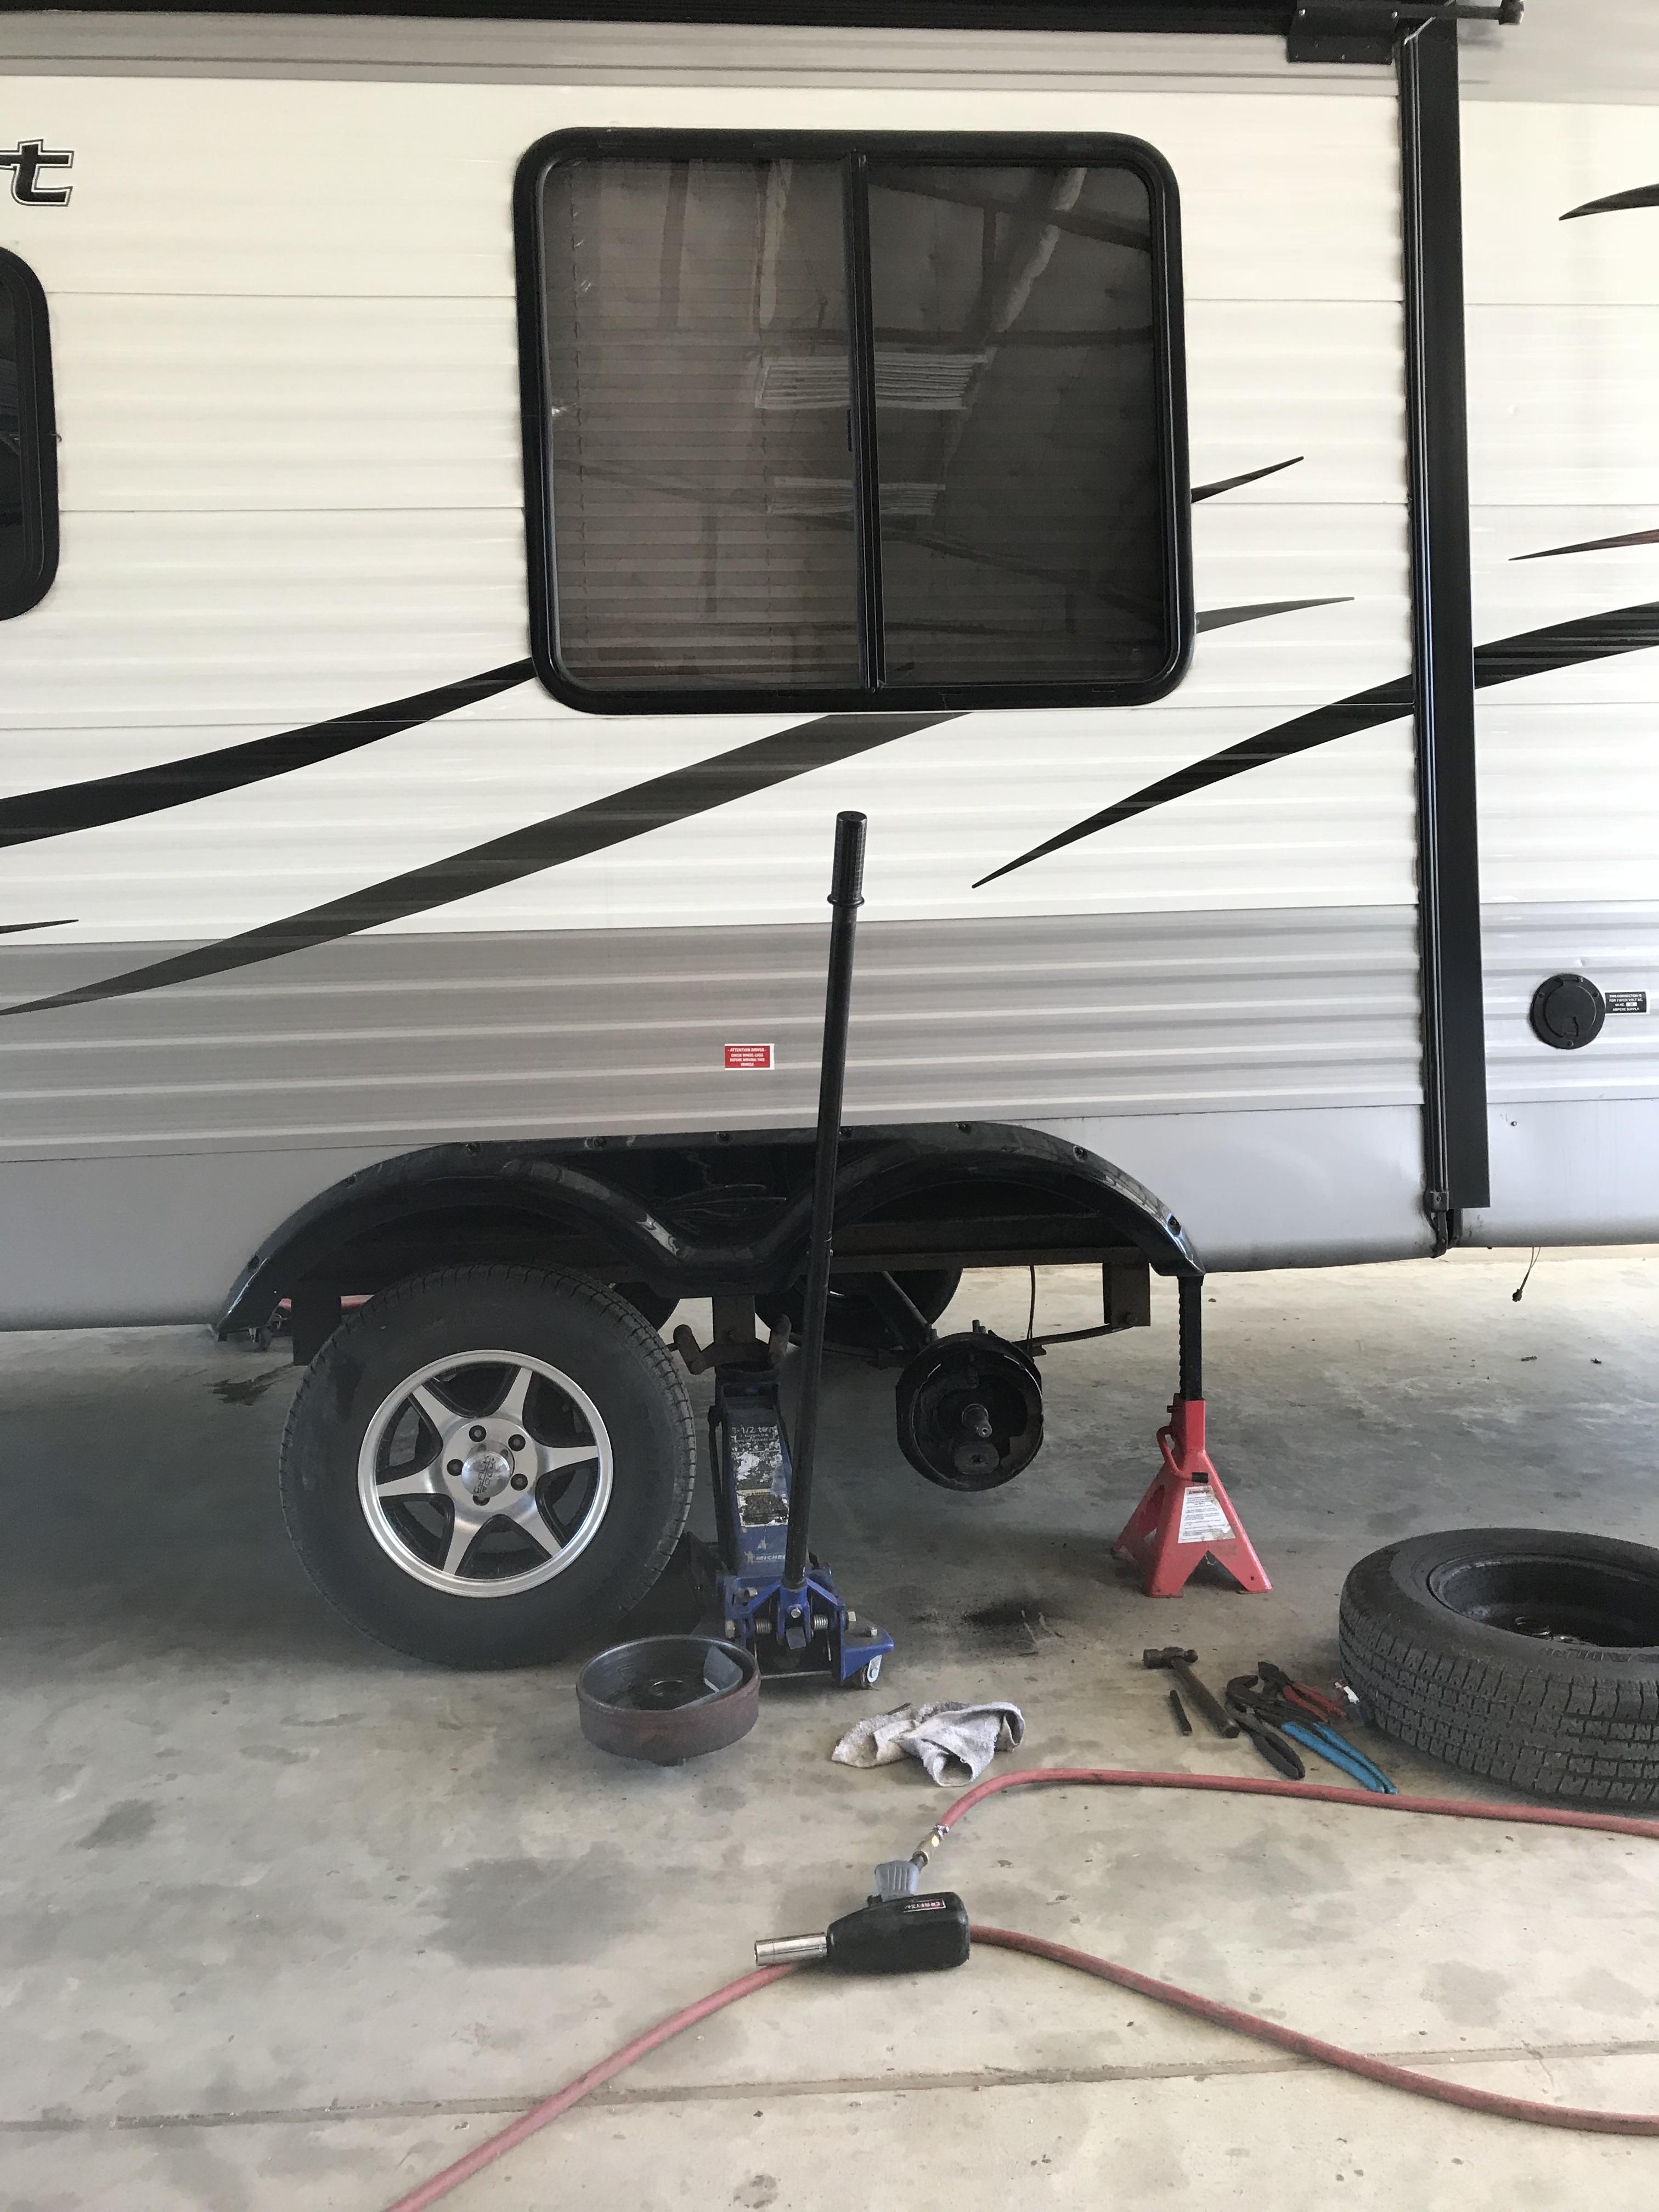 In the RV shop one tire off